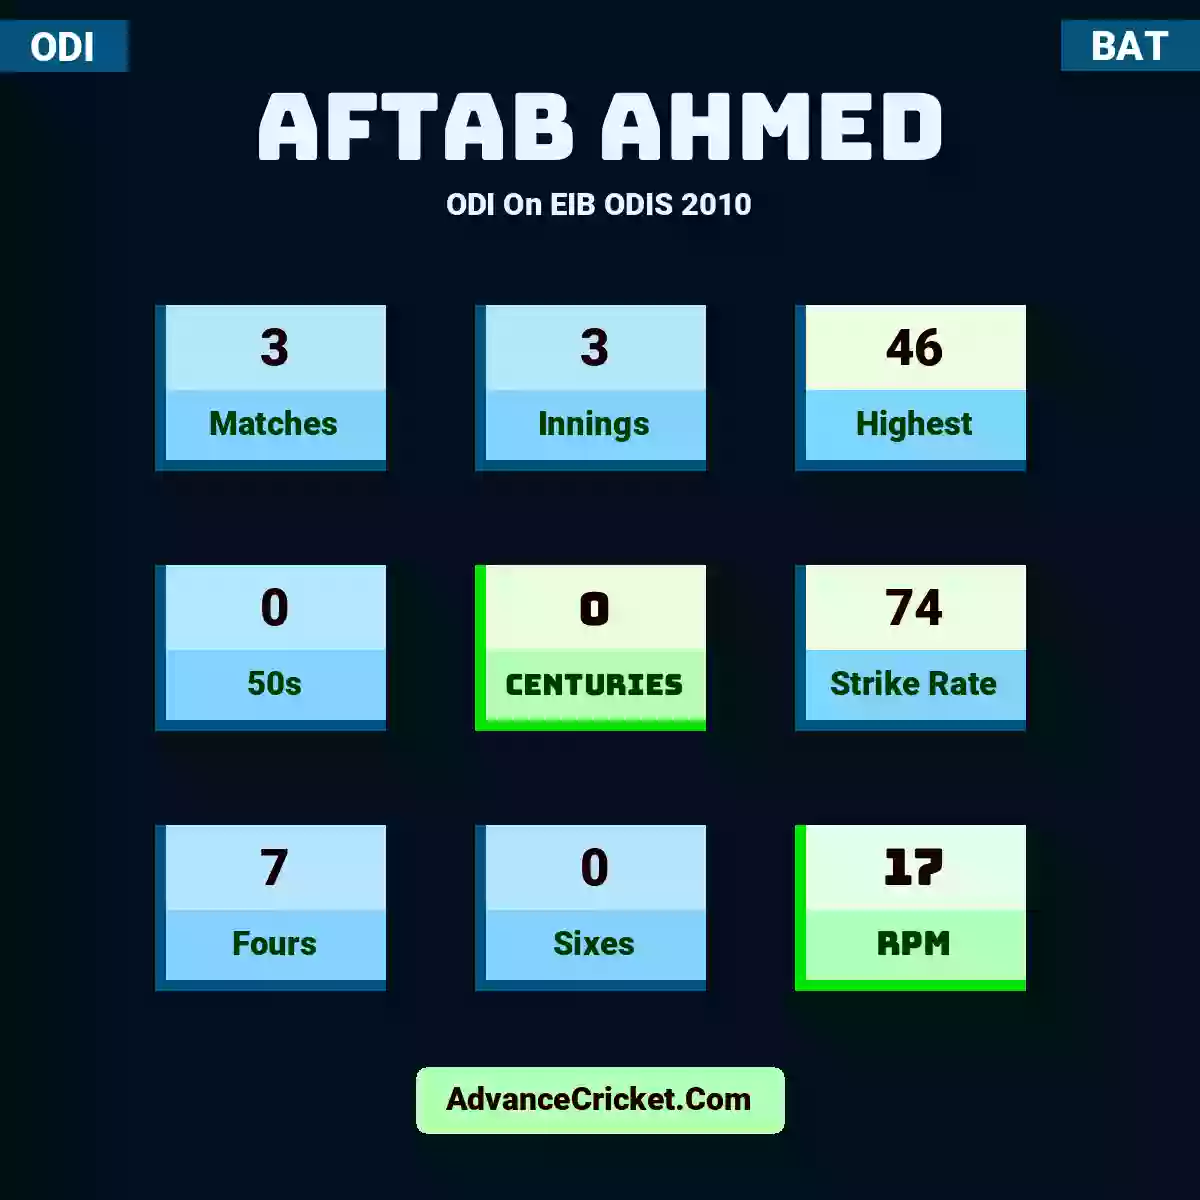 Aftab Ahmed ODI  On EIB ODIS 2010, Aftab Ahmed played 3 matches, scored 46 runs as highest, 0 half-centuries, and 0 centuries, with a strike rate of 74. A.Ahmed hit 7 fours and 0 sixes, with an RPM of 17.